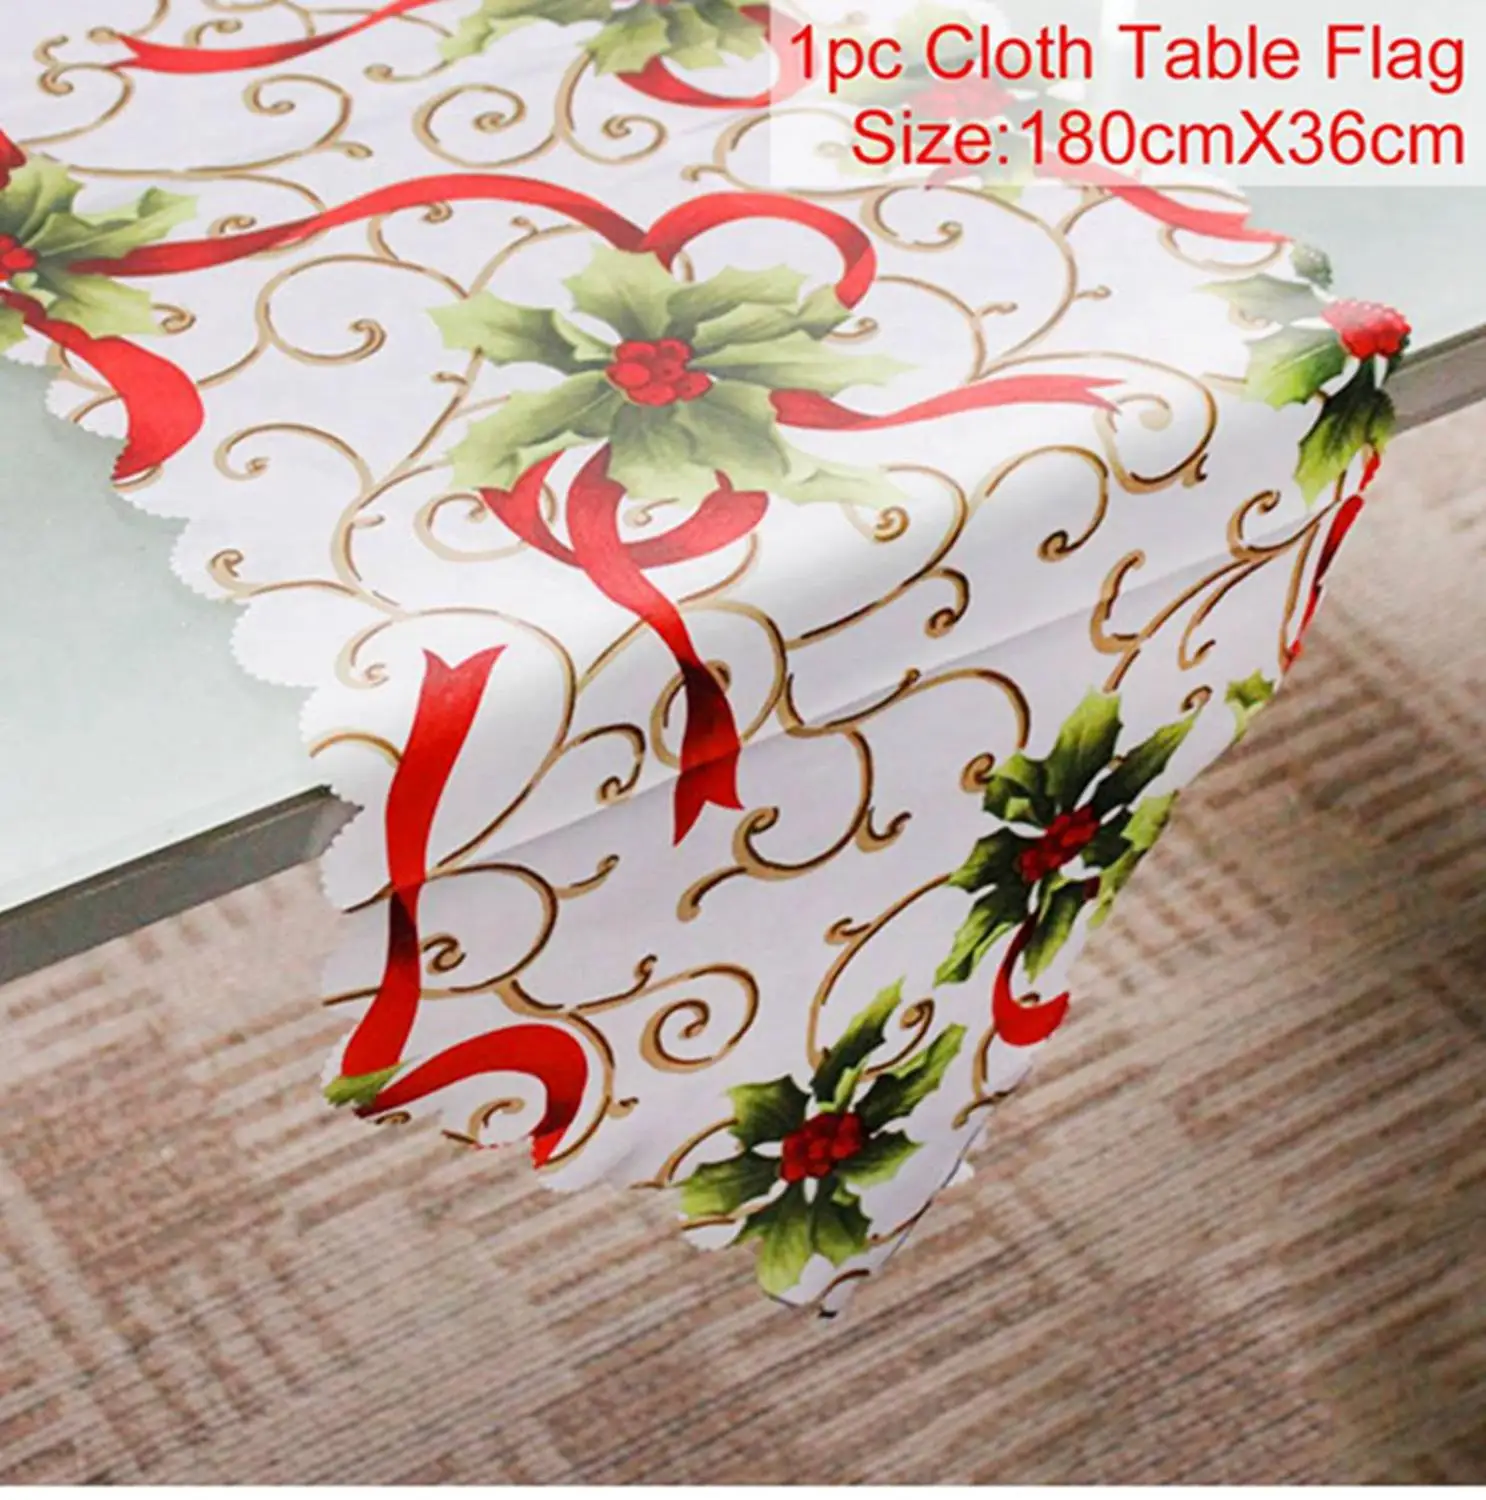 Huiran Linen Christmas Table Runner Elk Snowman Table Flag Merry Christmas Decorations for Home Navidad Happy New Year - Color: violet